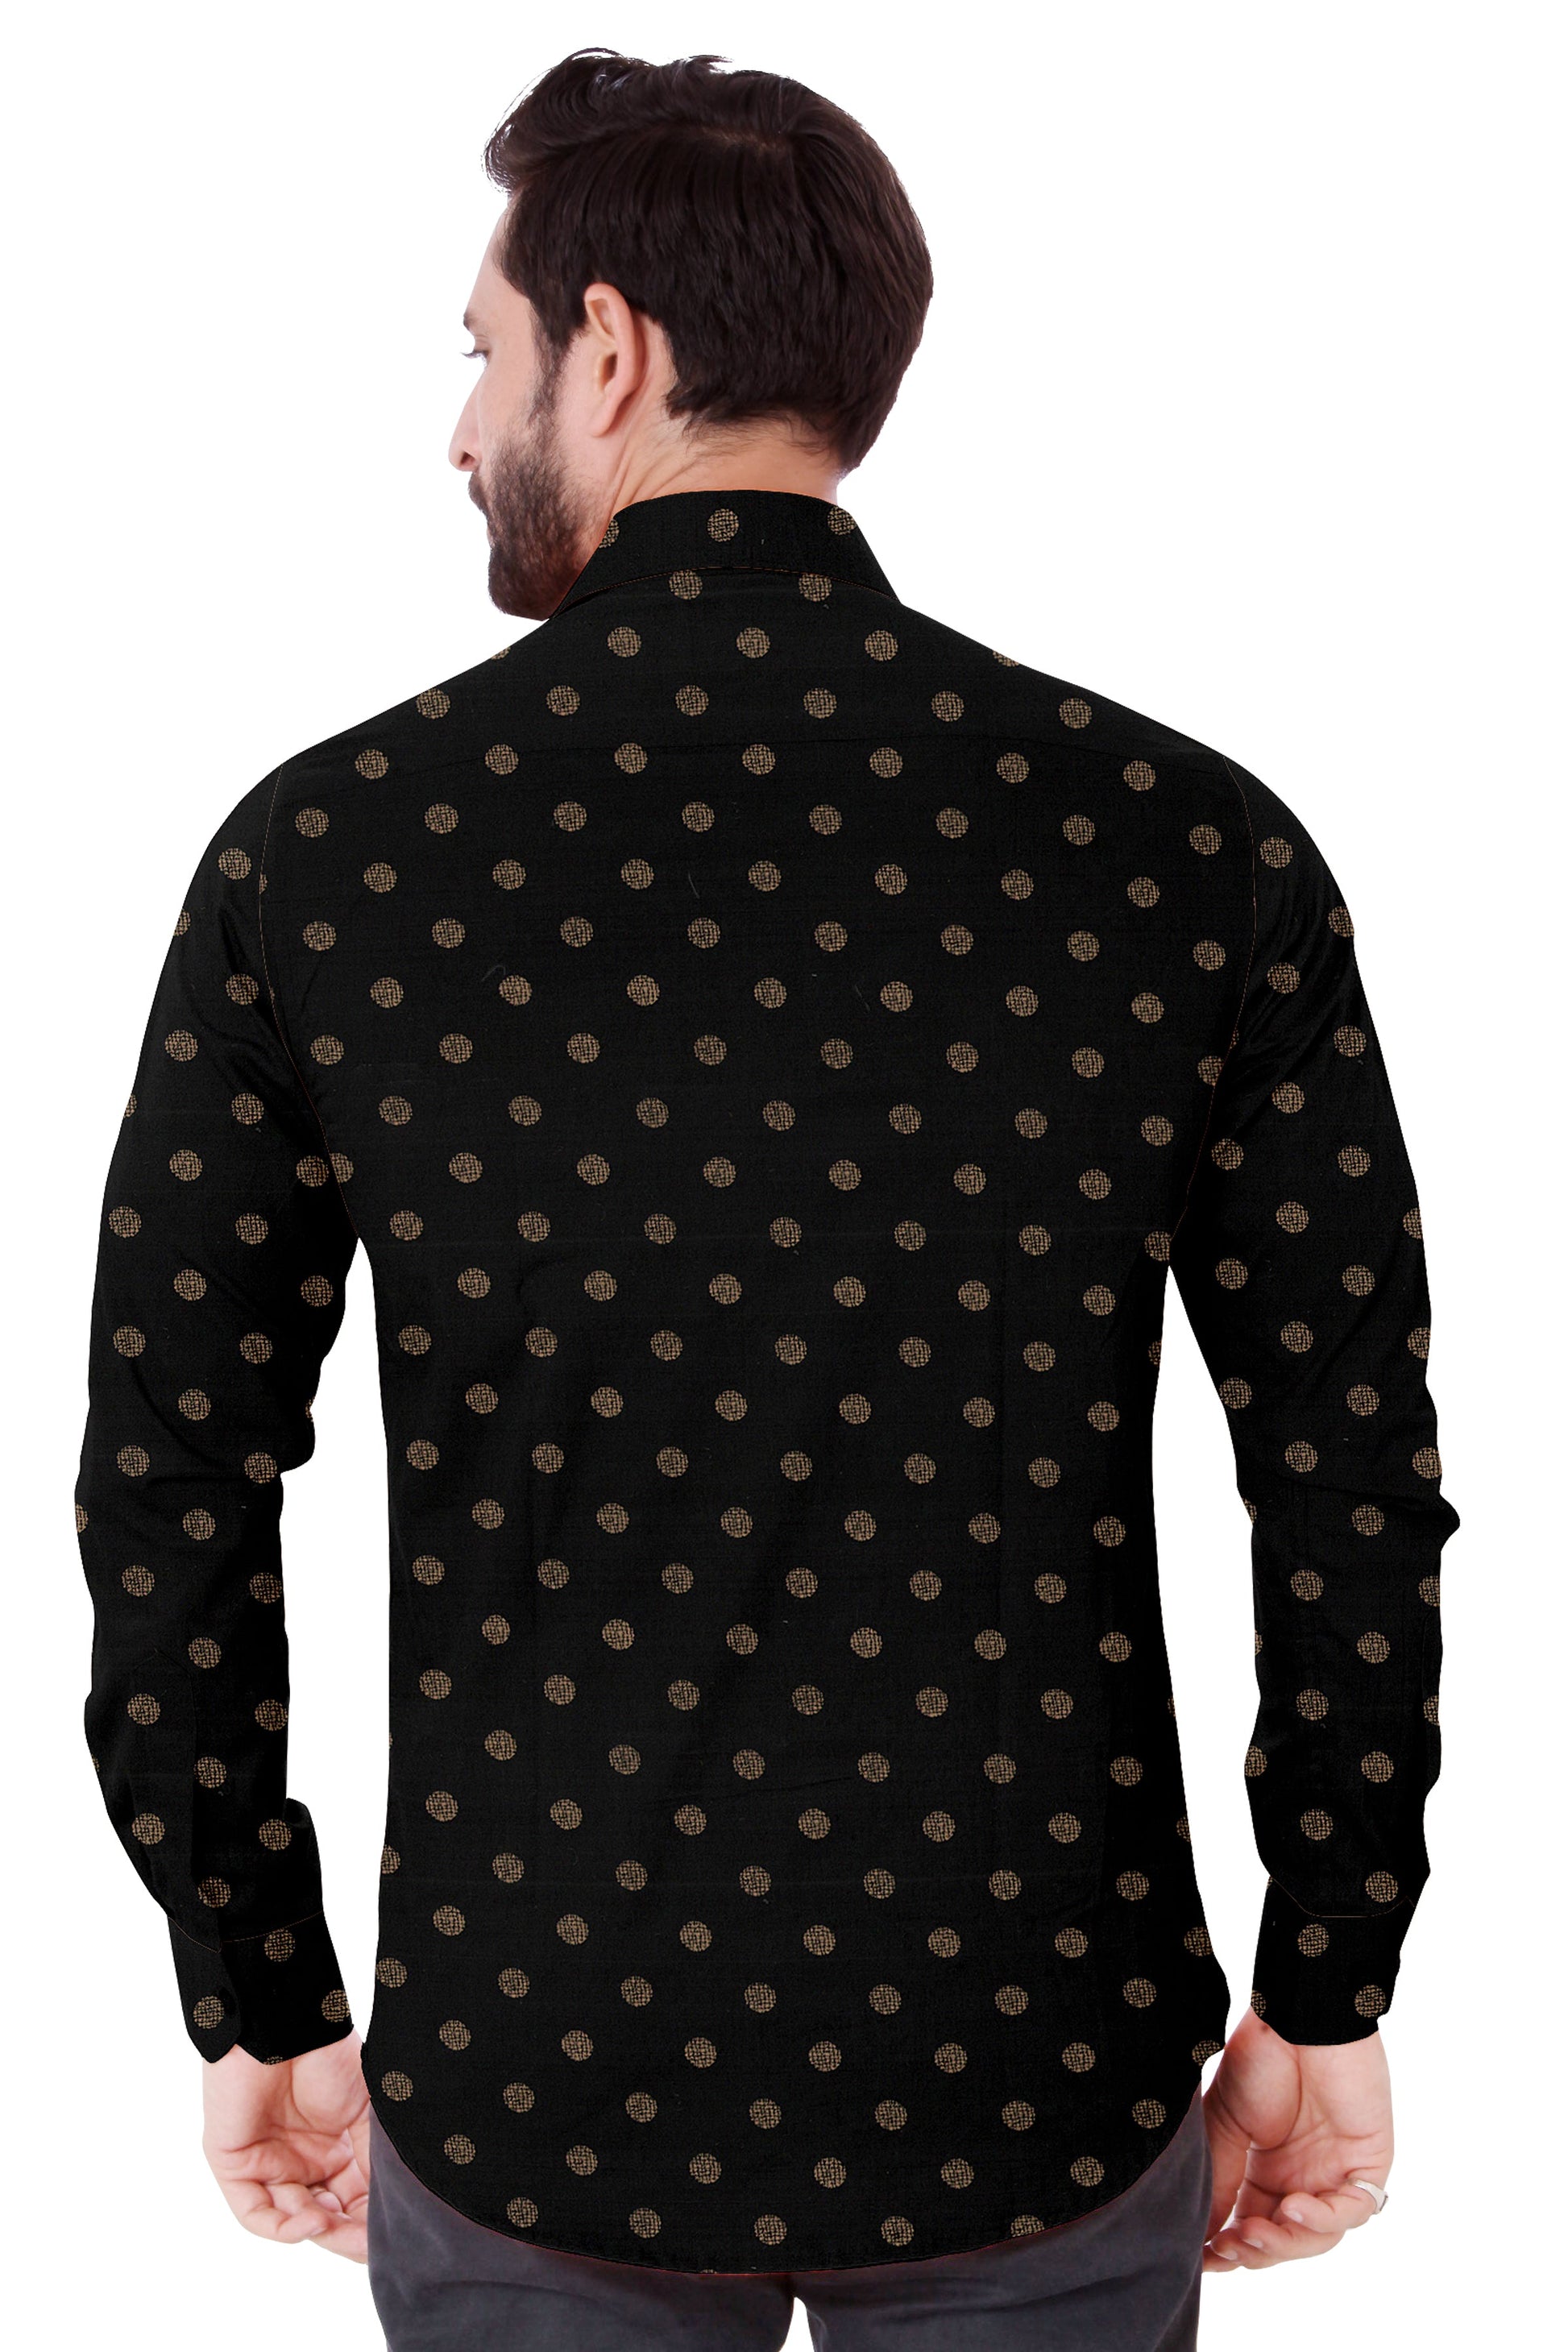 Men's Black Yellow Dotted Casual Shirt Full Sleeves 100% Cotton - Styleflea